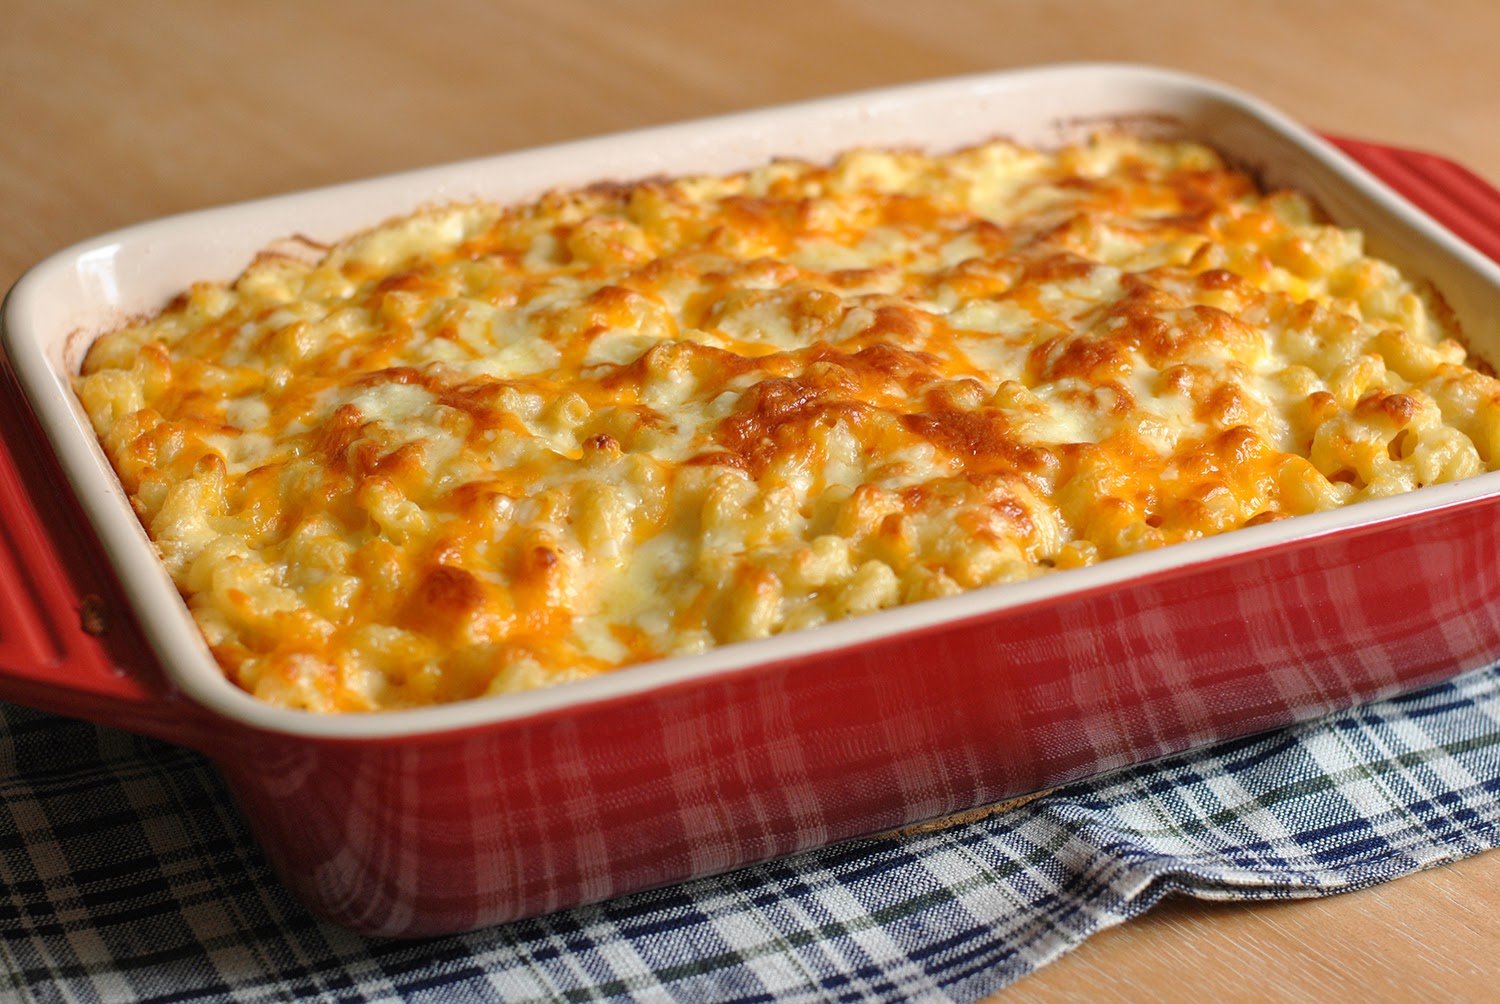 baked macaroni with cheese sauce